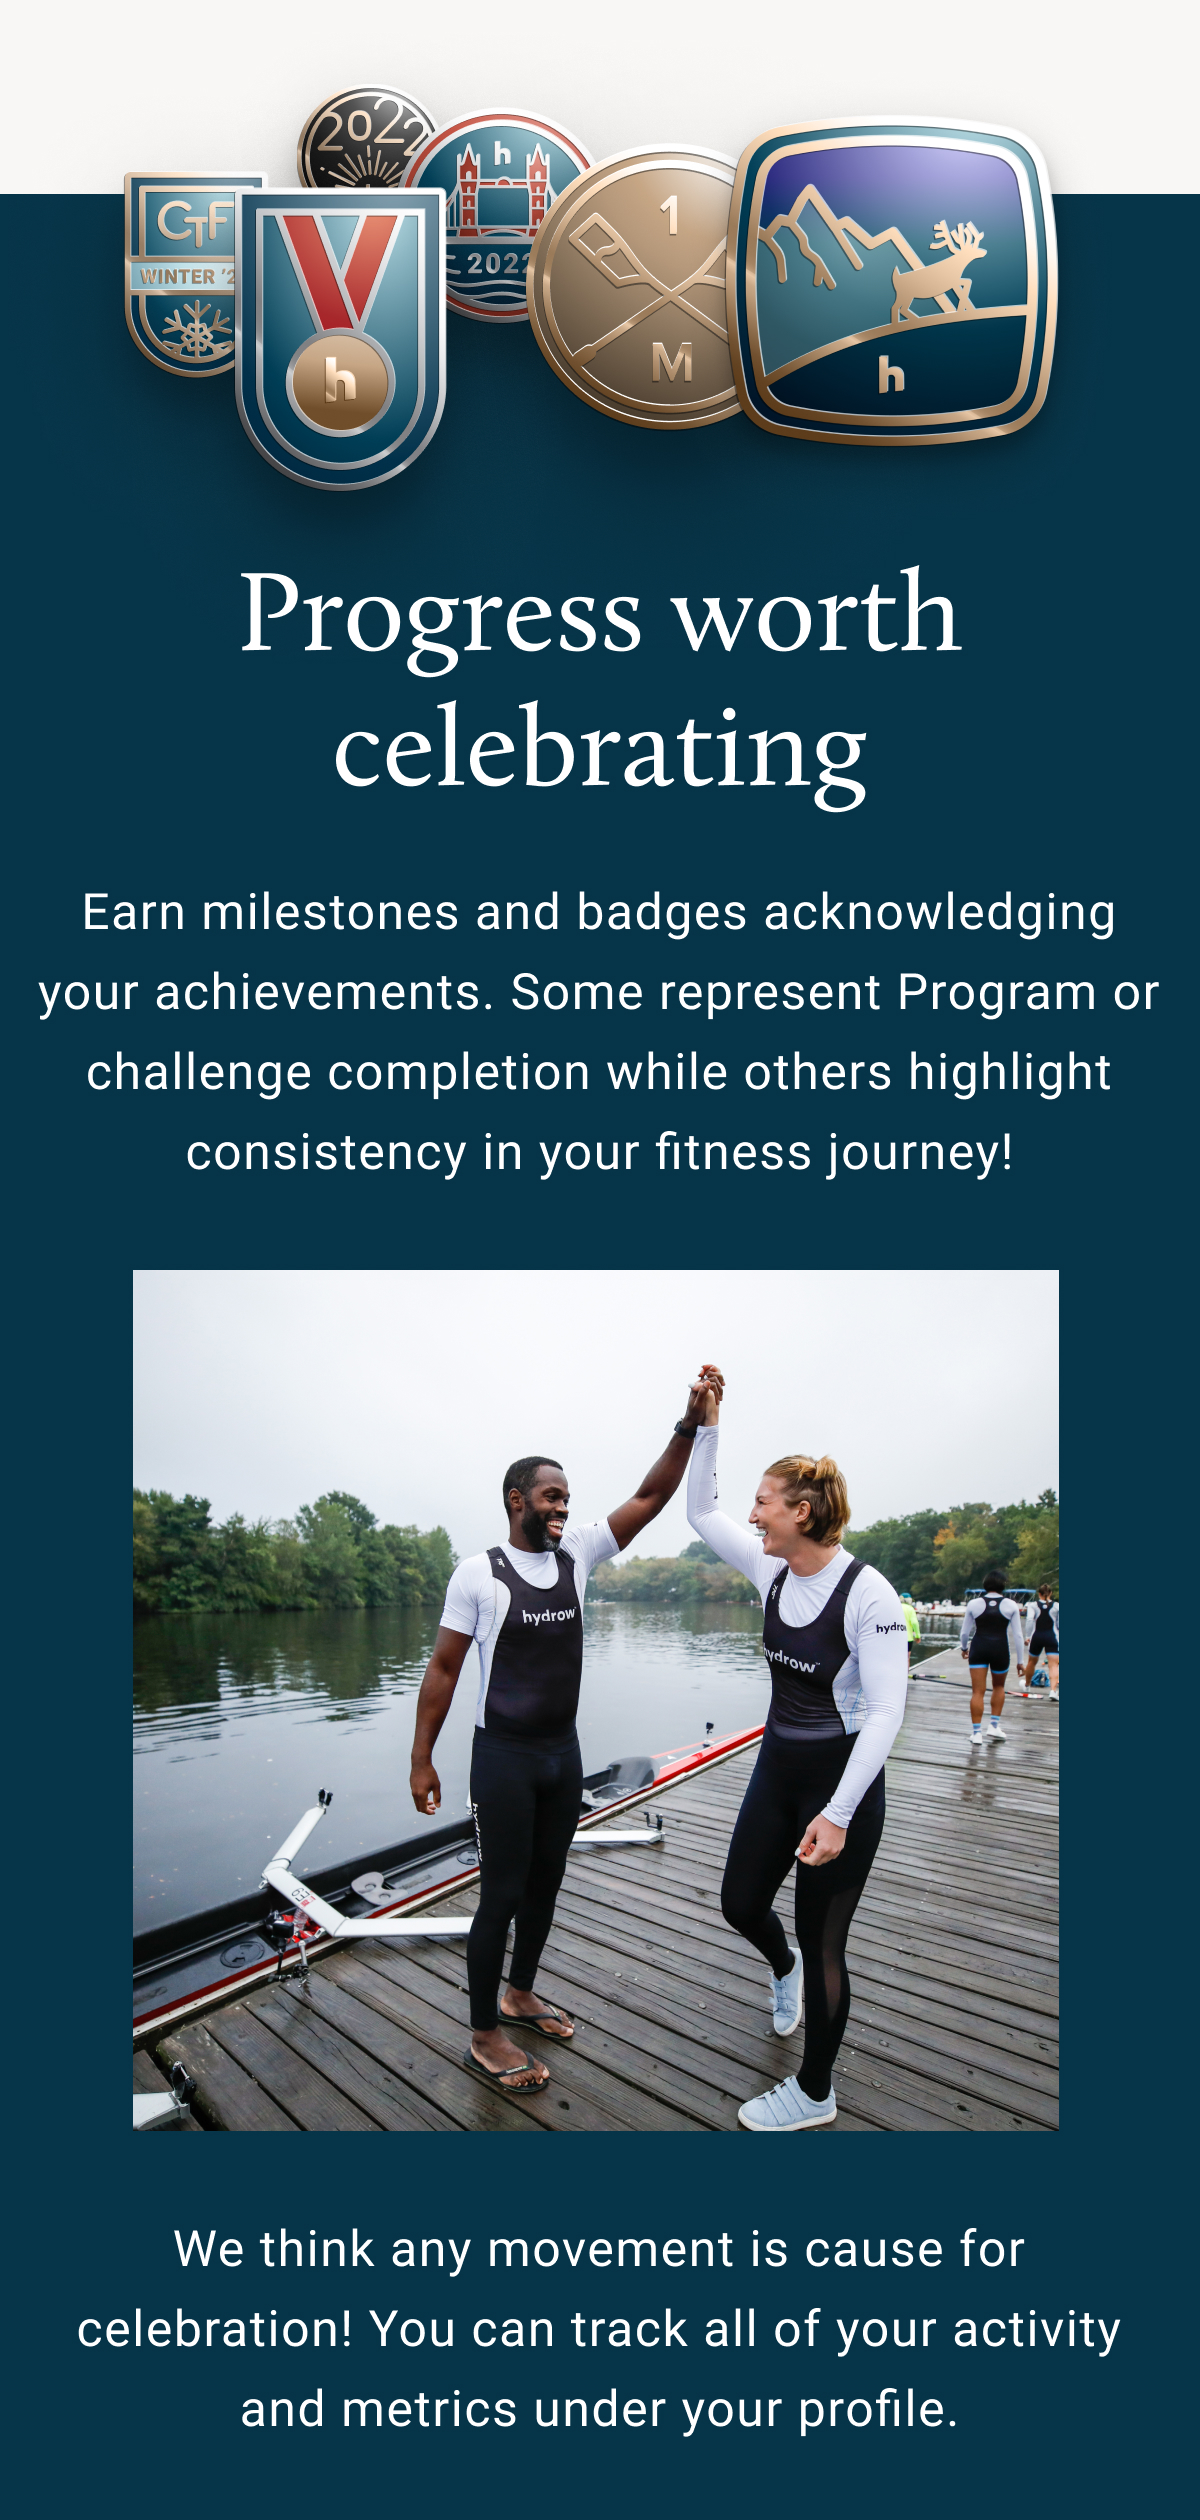 Progress worth celebrating. Earn milestones and badges acknowledging your achievements. Some represent Program or challenge completion while others highlight consistency in your fitness journey! We think any movement is cause for celebration! You can track all of your activity and metrics under your profile.